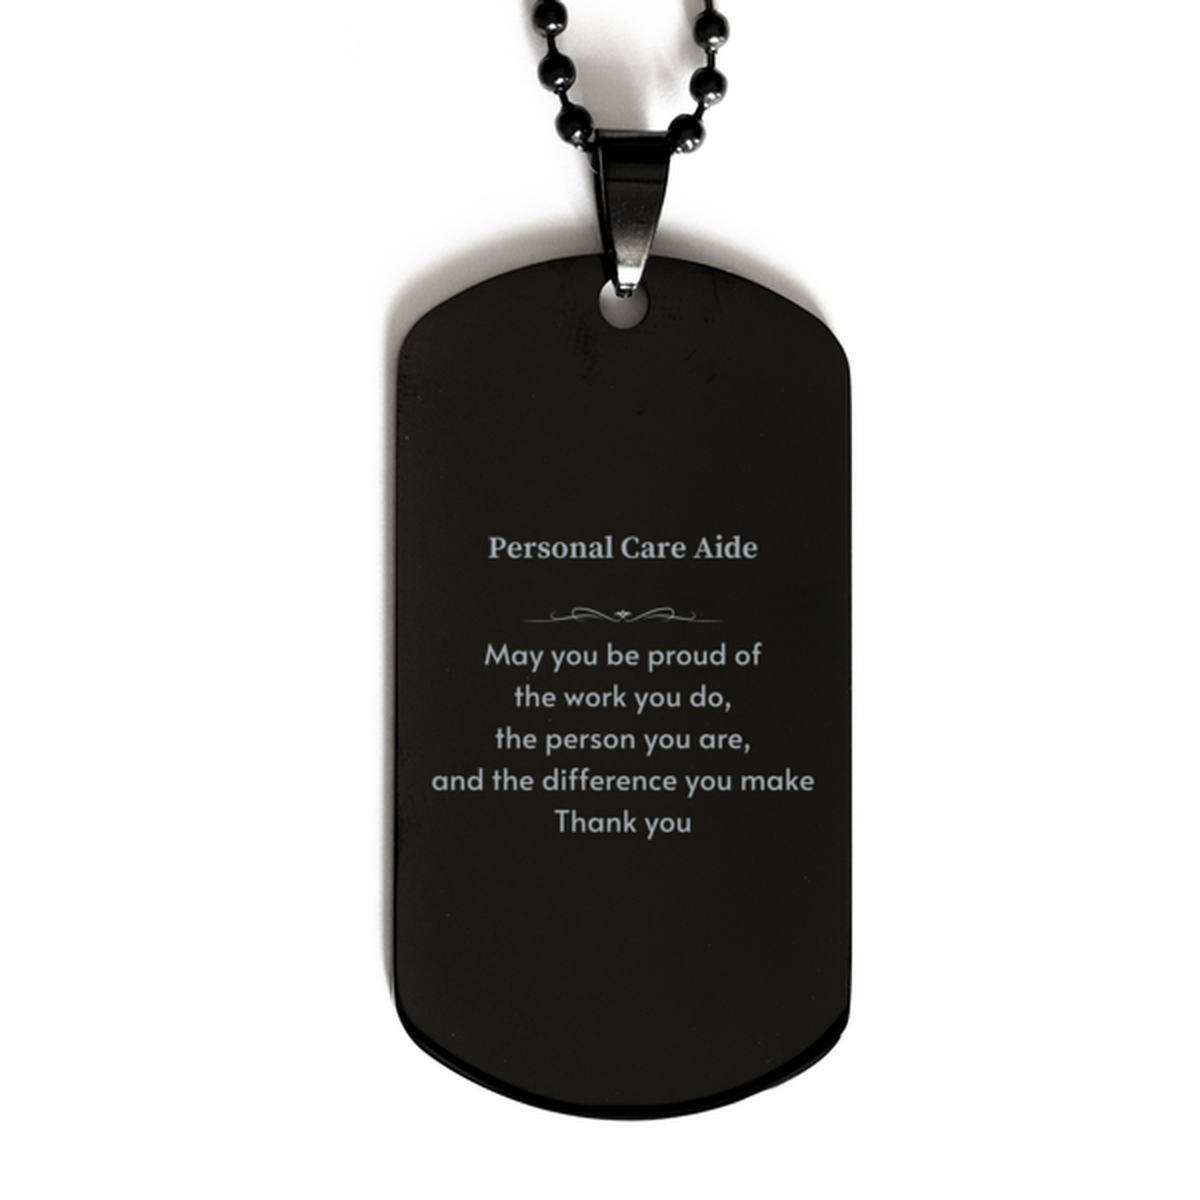 Heartwarming Black Dog Tag Retirement Coworkers Gifts for Personal Care Aide, Personal Care Aide May You be proud of the work you do, the person you are Gifts for Boss Men Women Friends